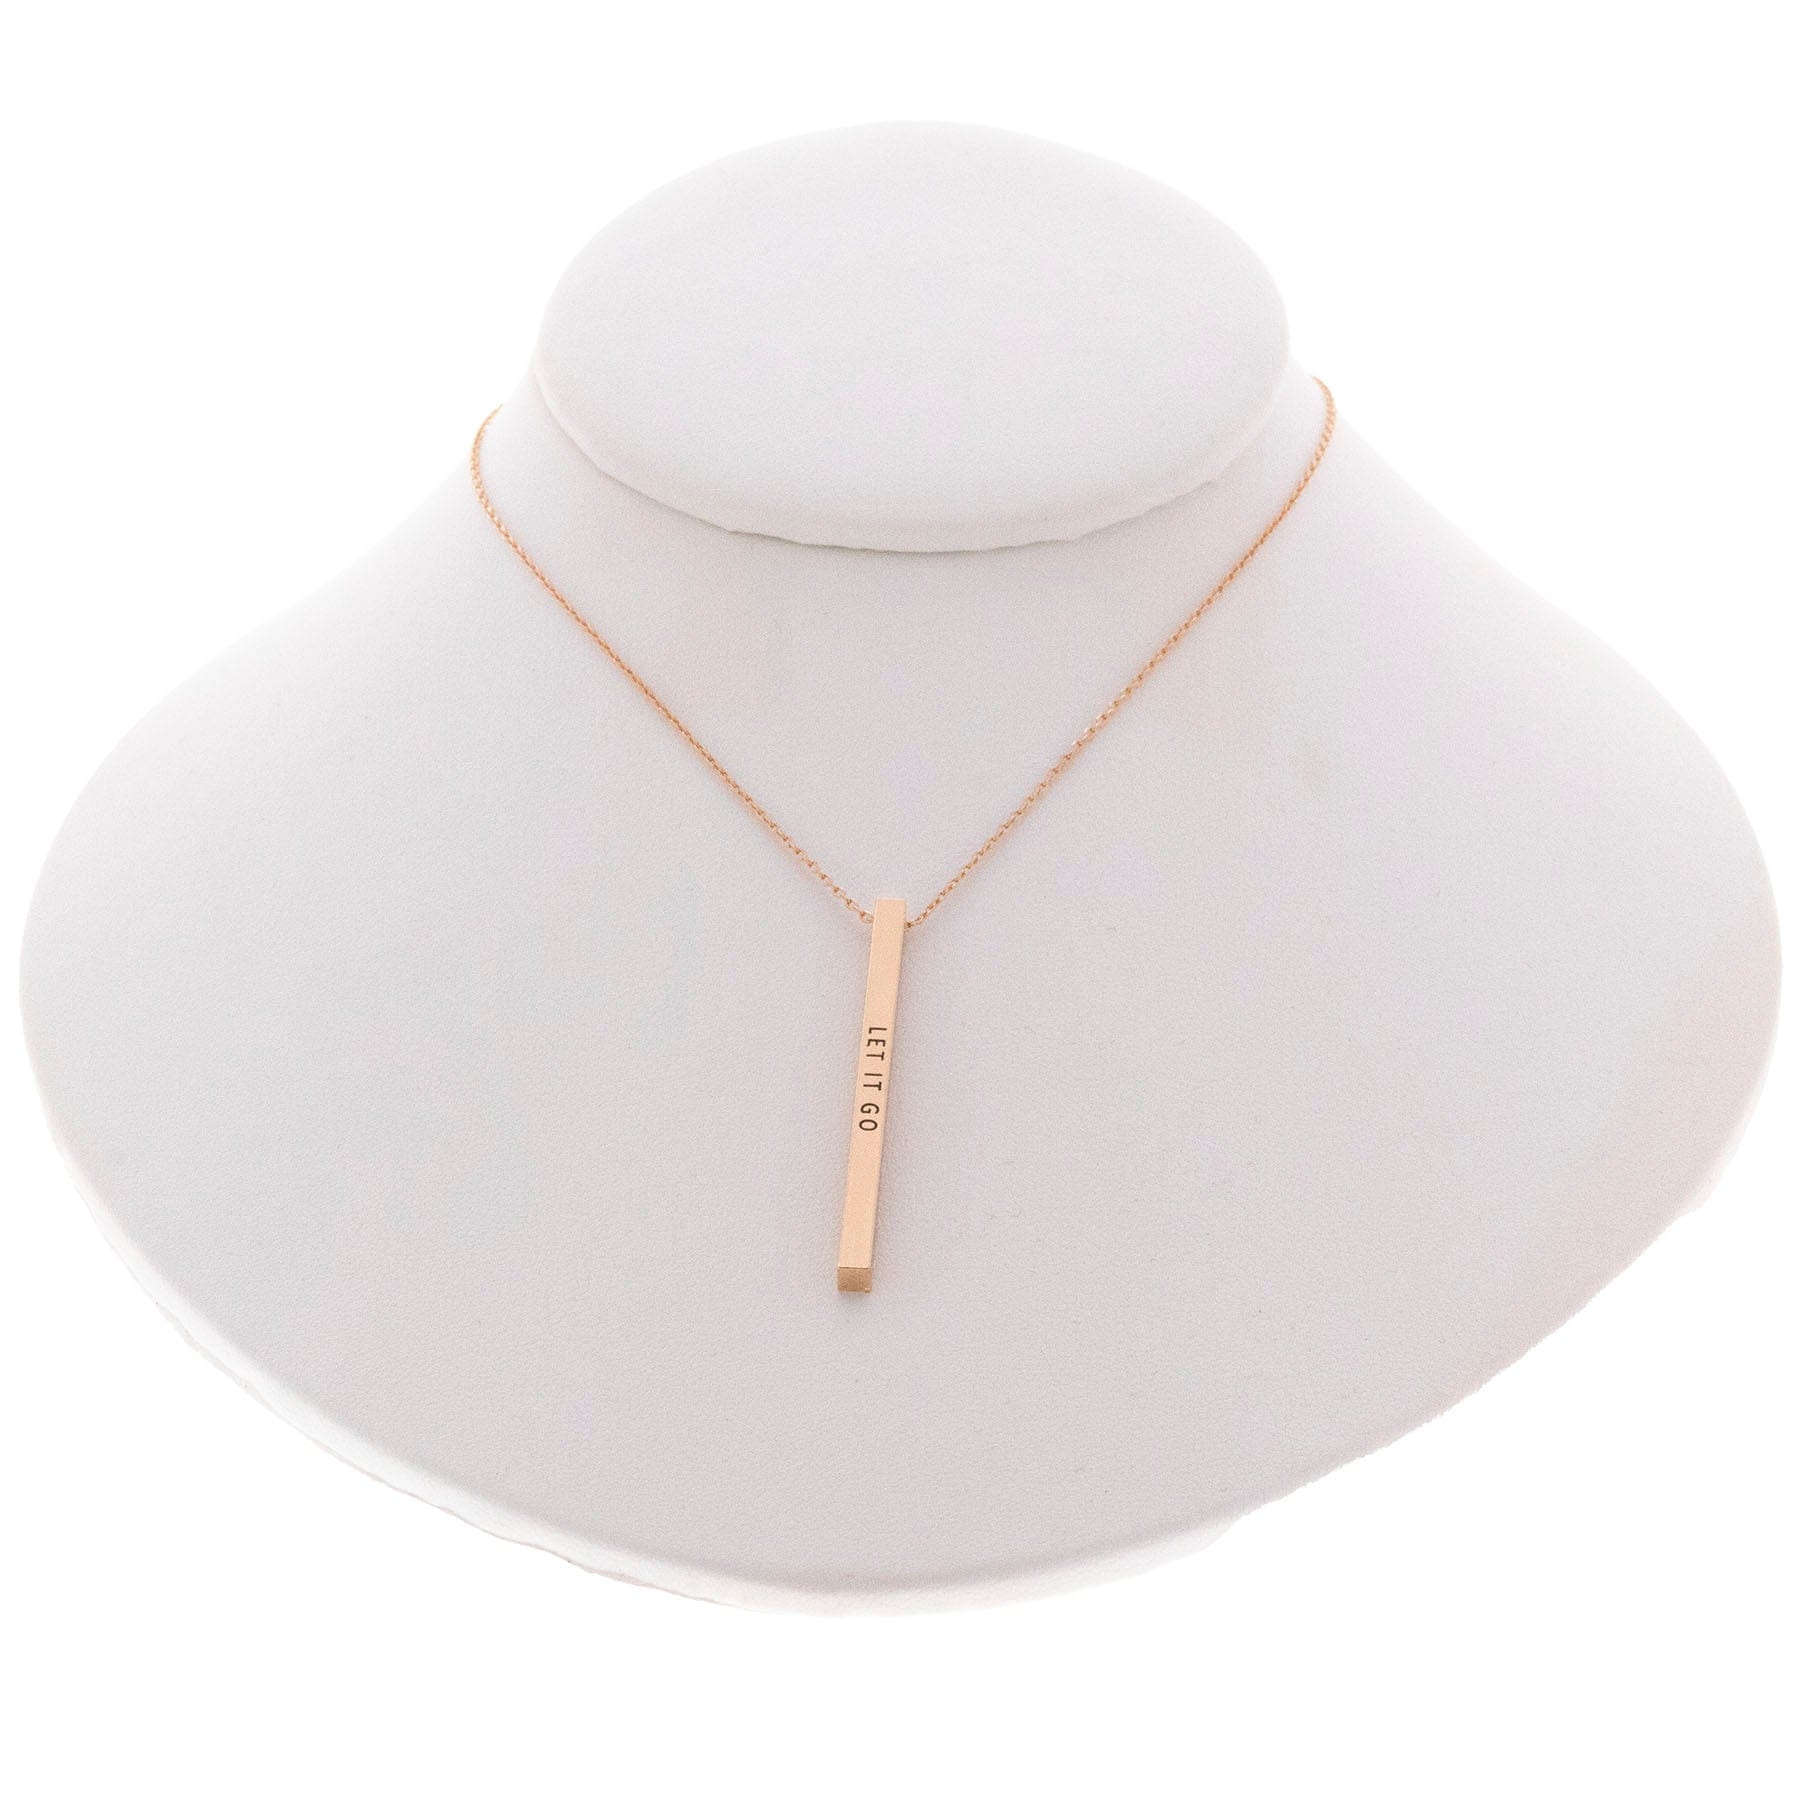 "Let It Go" Bar Necklace By Recovery Matters Rose Gold